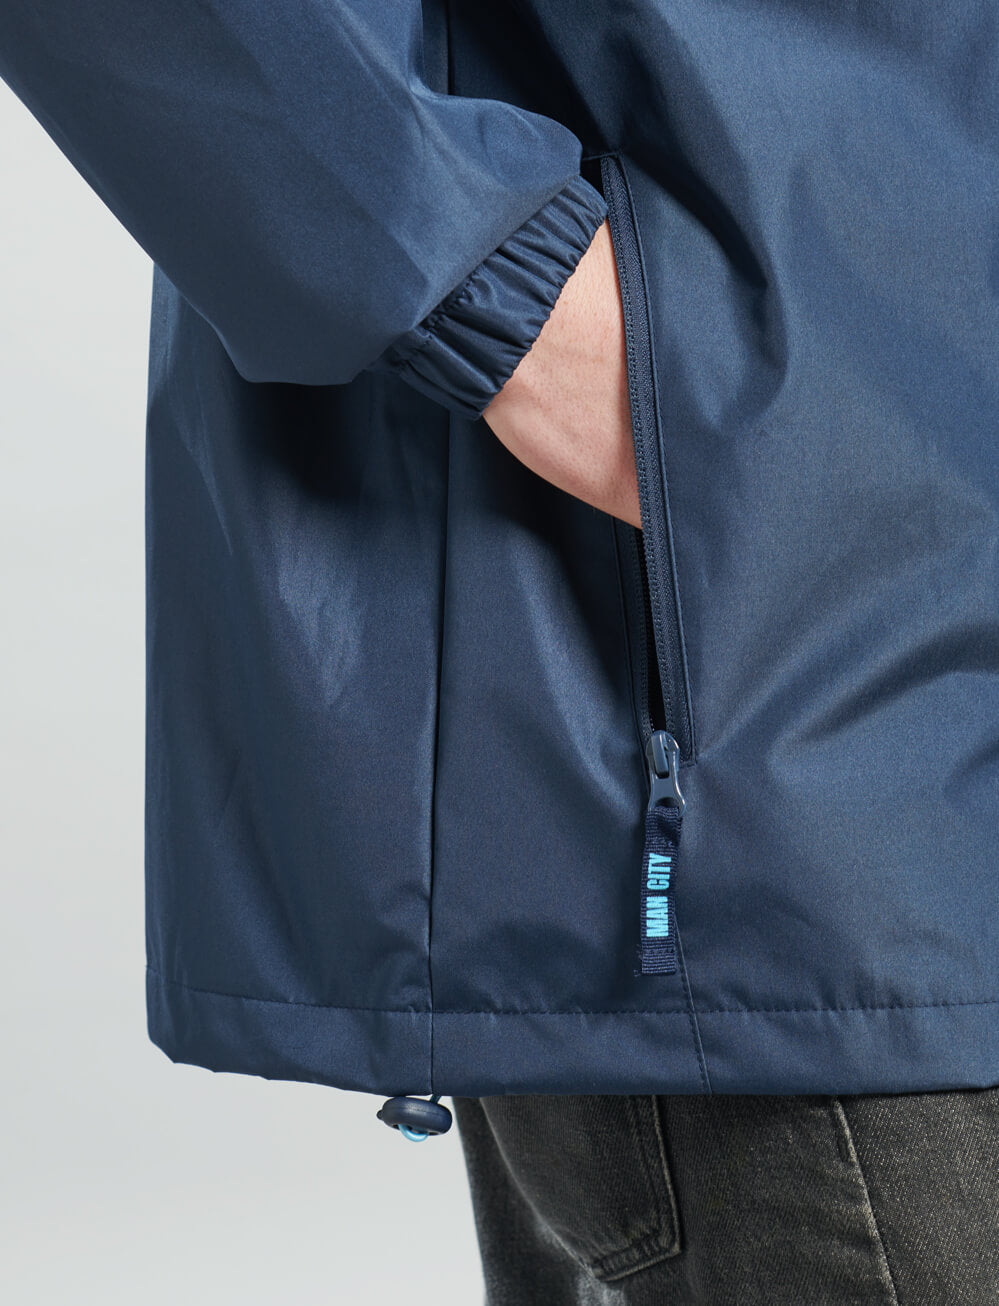 Official Manchester City Shower Jacket - Navy | The World Football Store